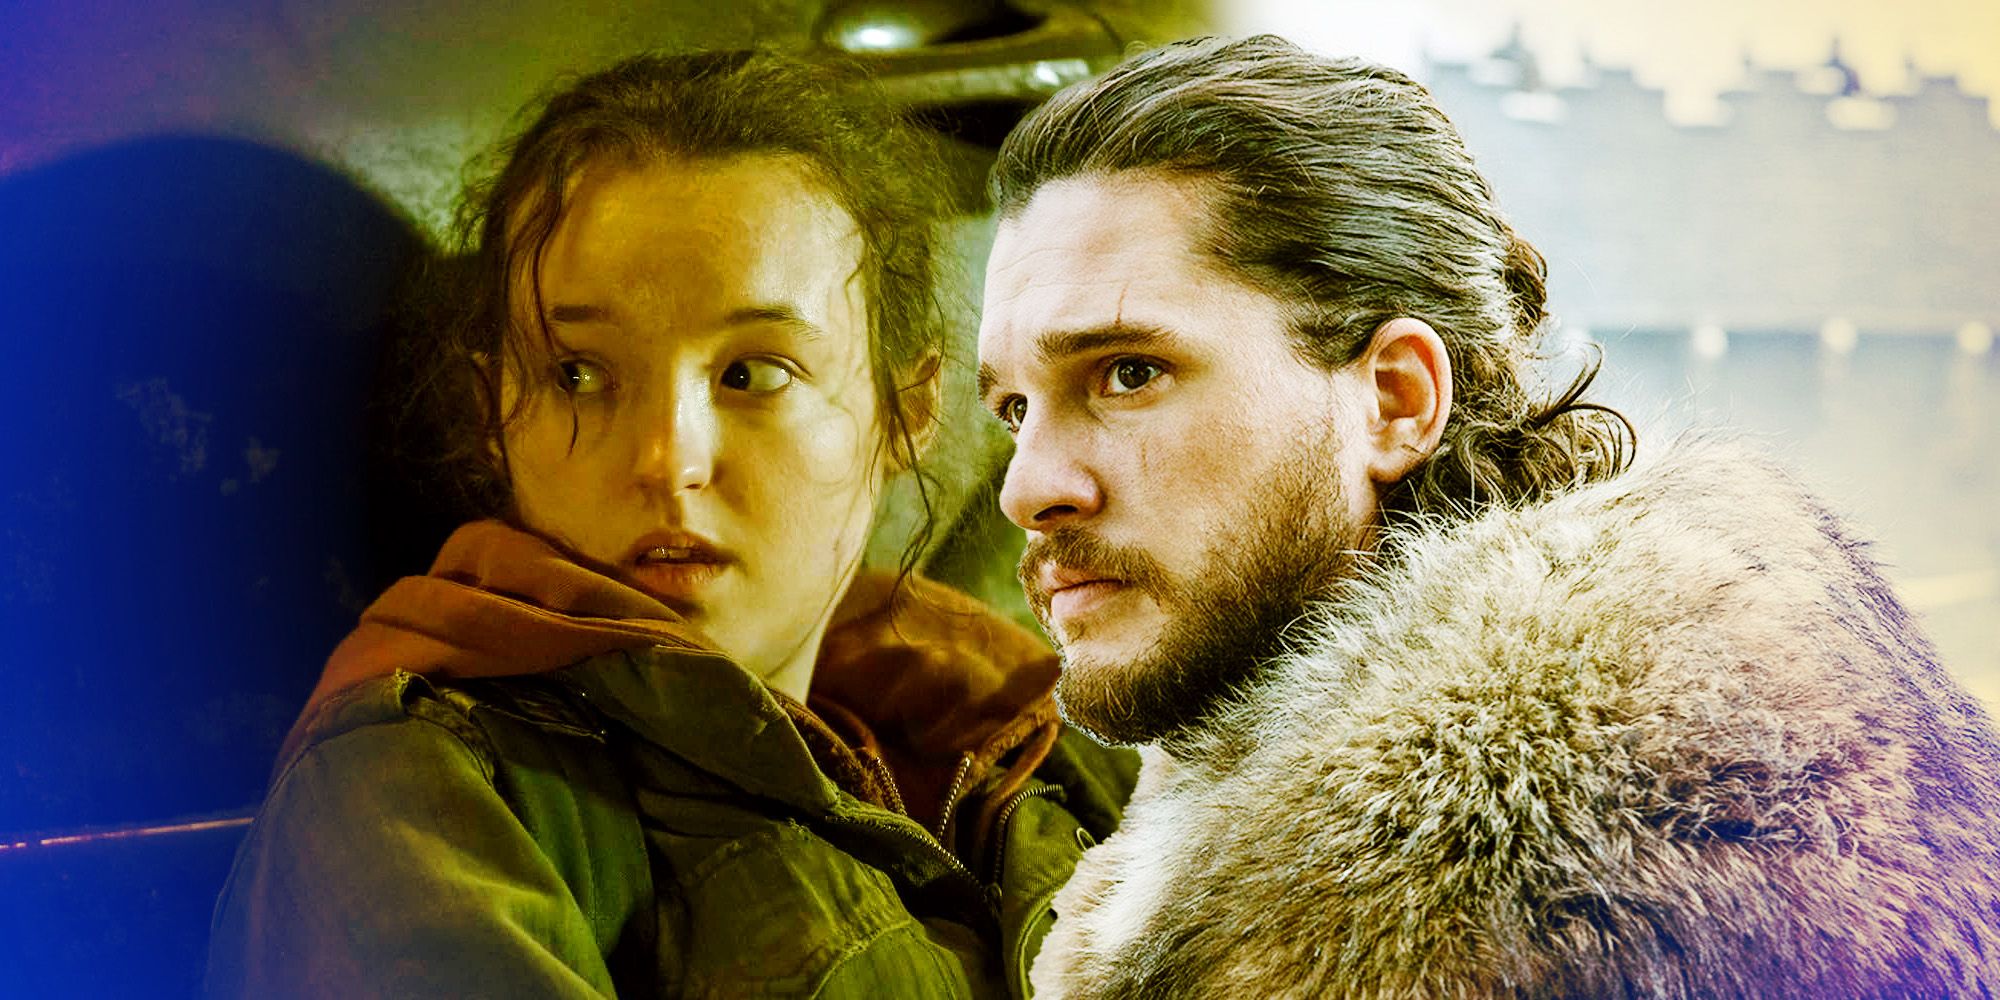 Ellie from The Last of Us and Jon Snow from Game of Thrones